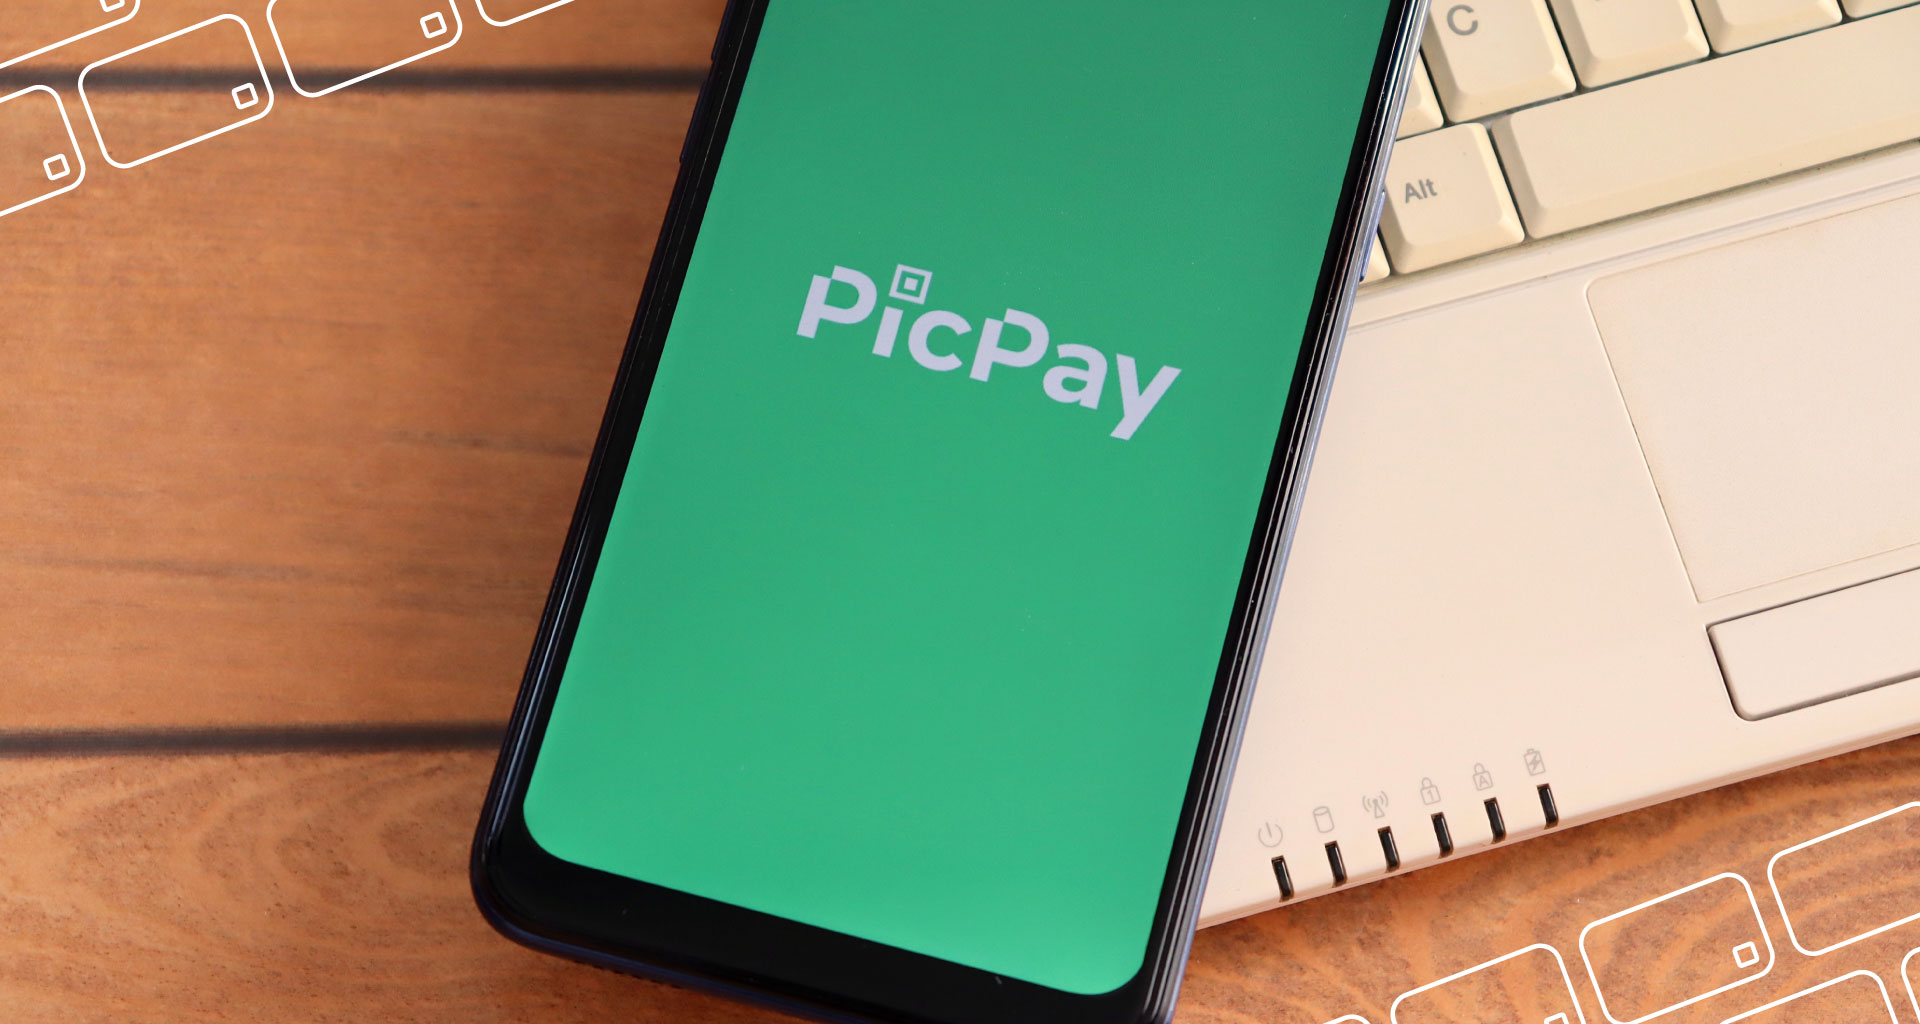 Picpay payment